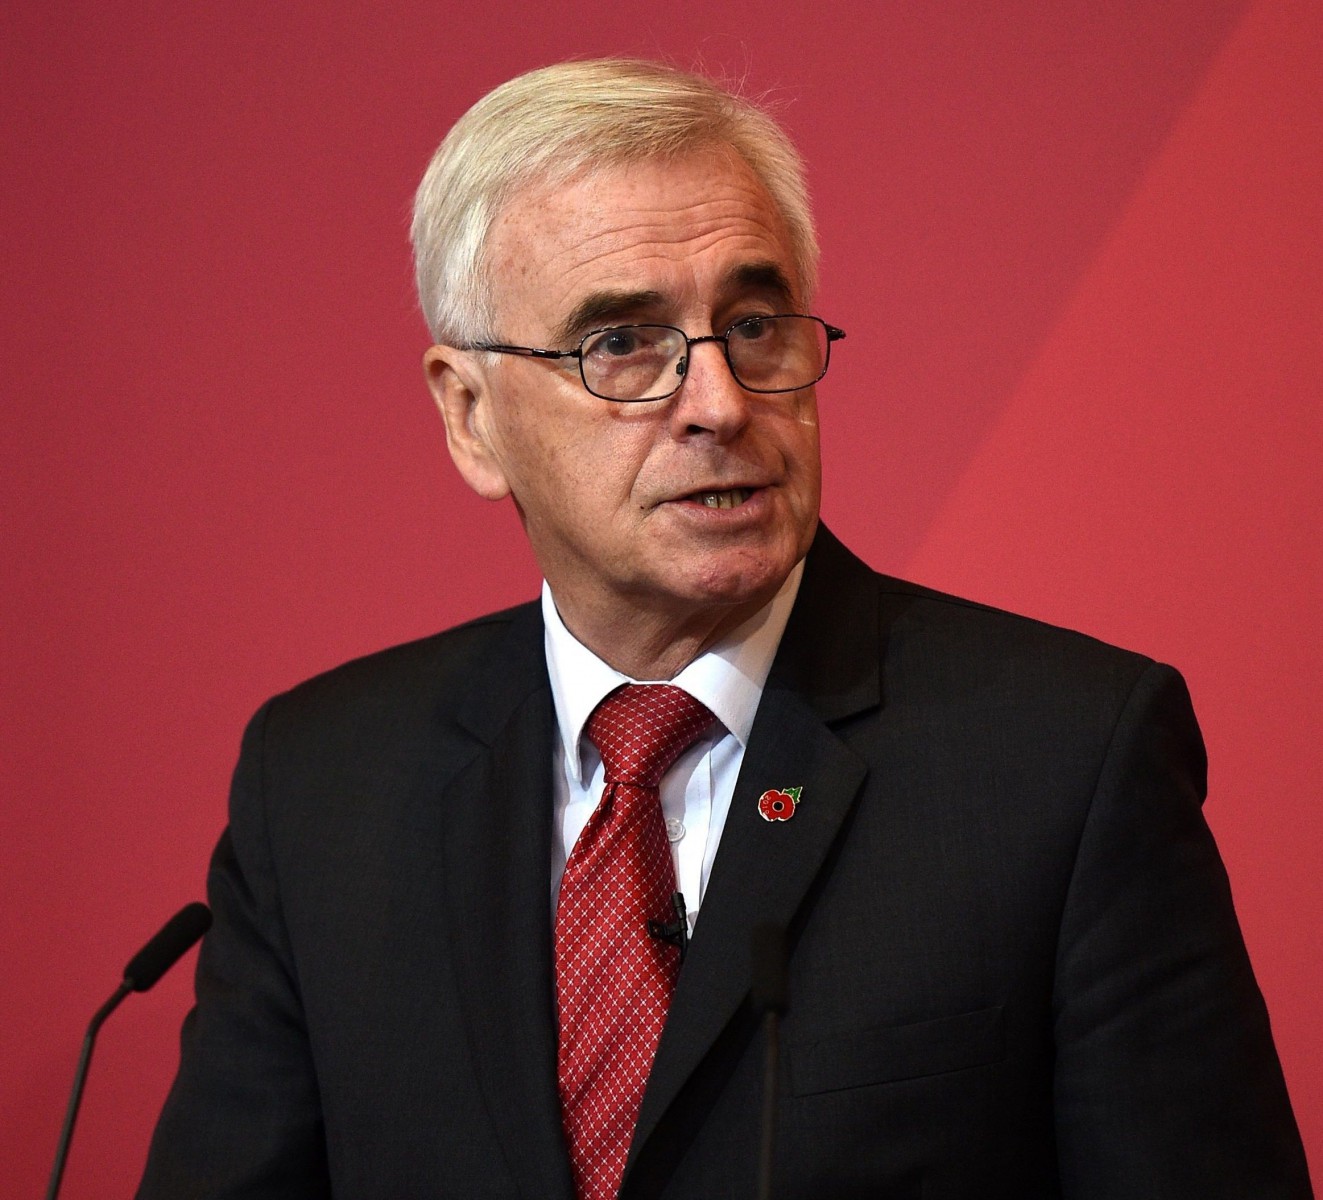 Shadow Chancellor John McDonnell has said he and Mr Corbyn will quit if they fail to lead Labour into power